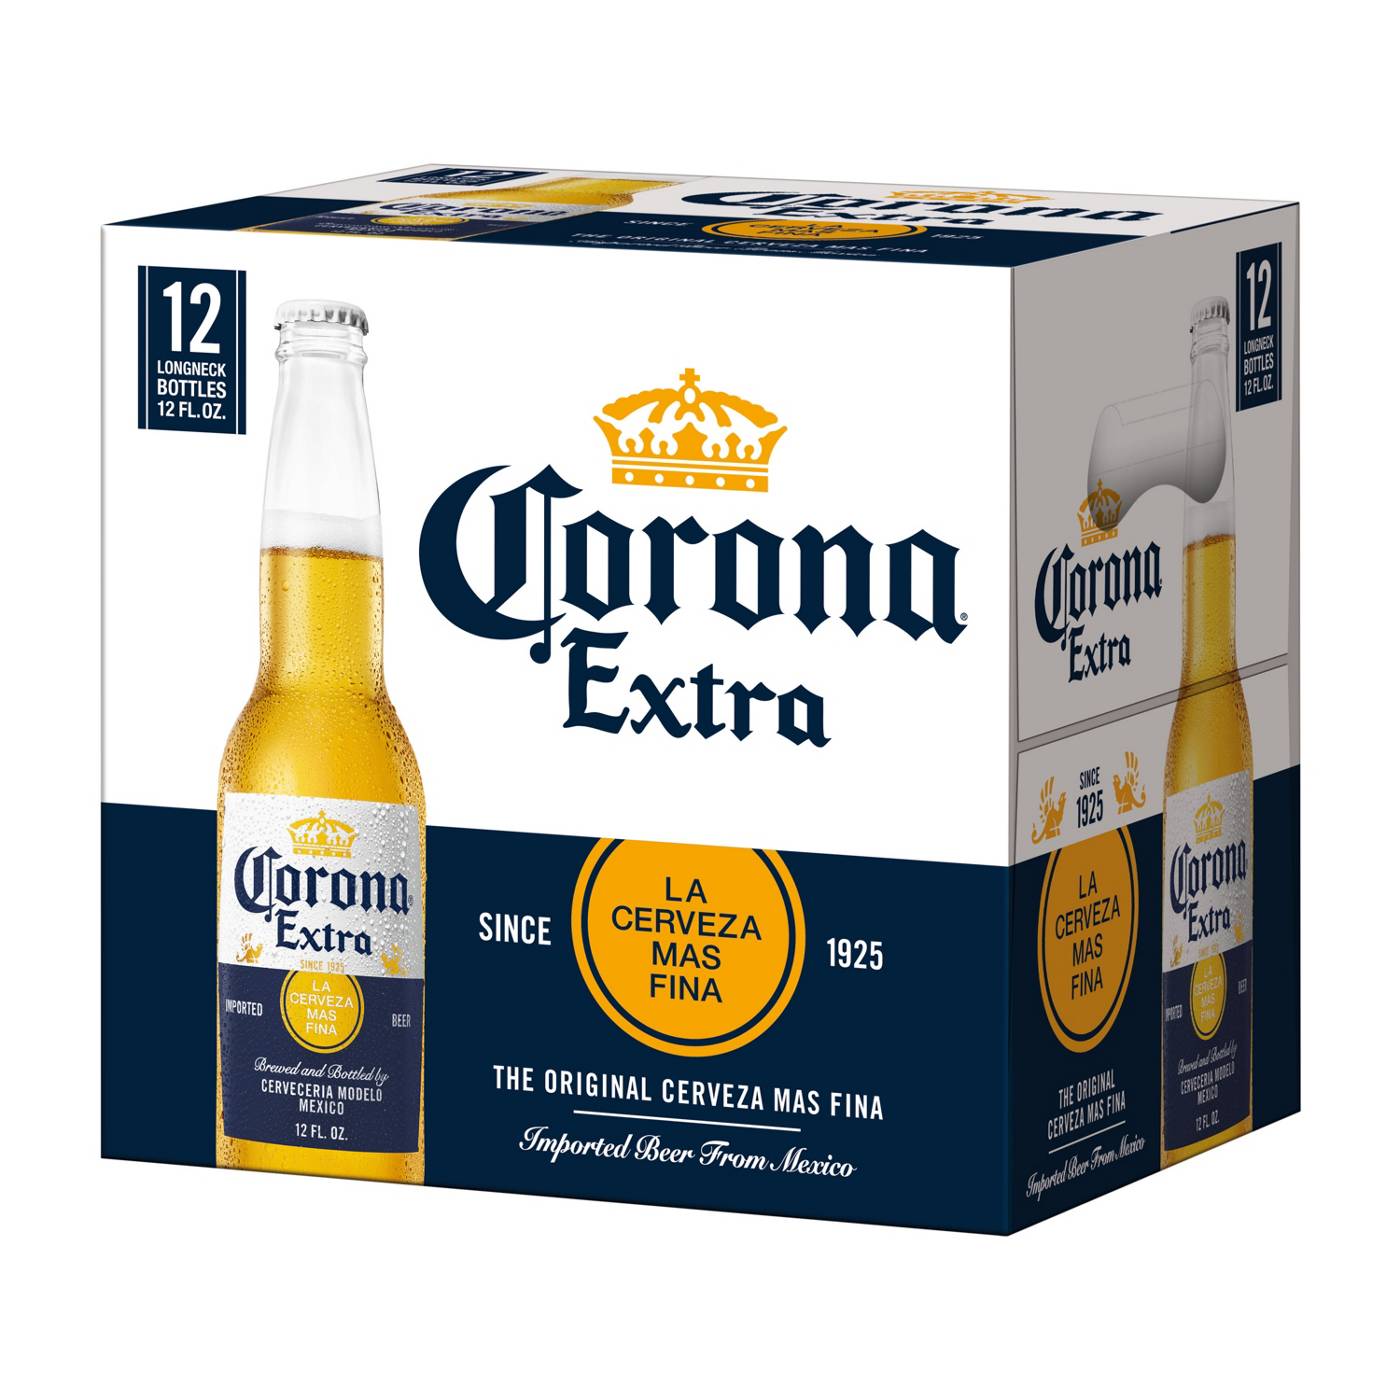 Corona Extra Mexican Lager Import Beer 12 oz Bottles, 12 pk; image 6 of 10